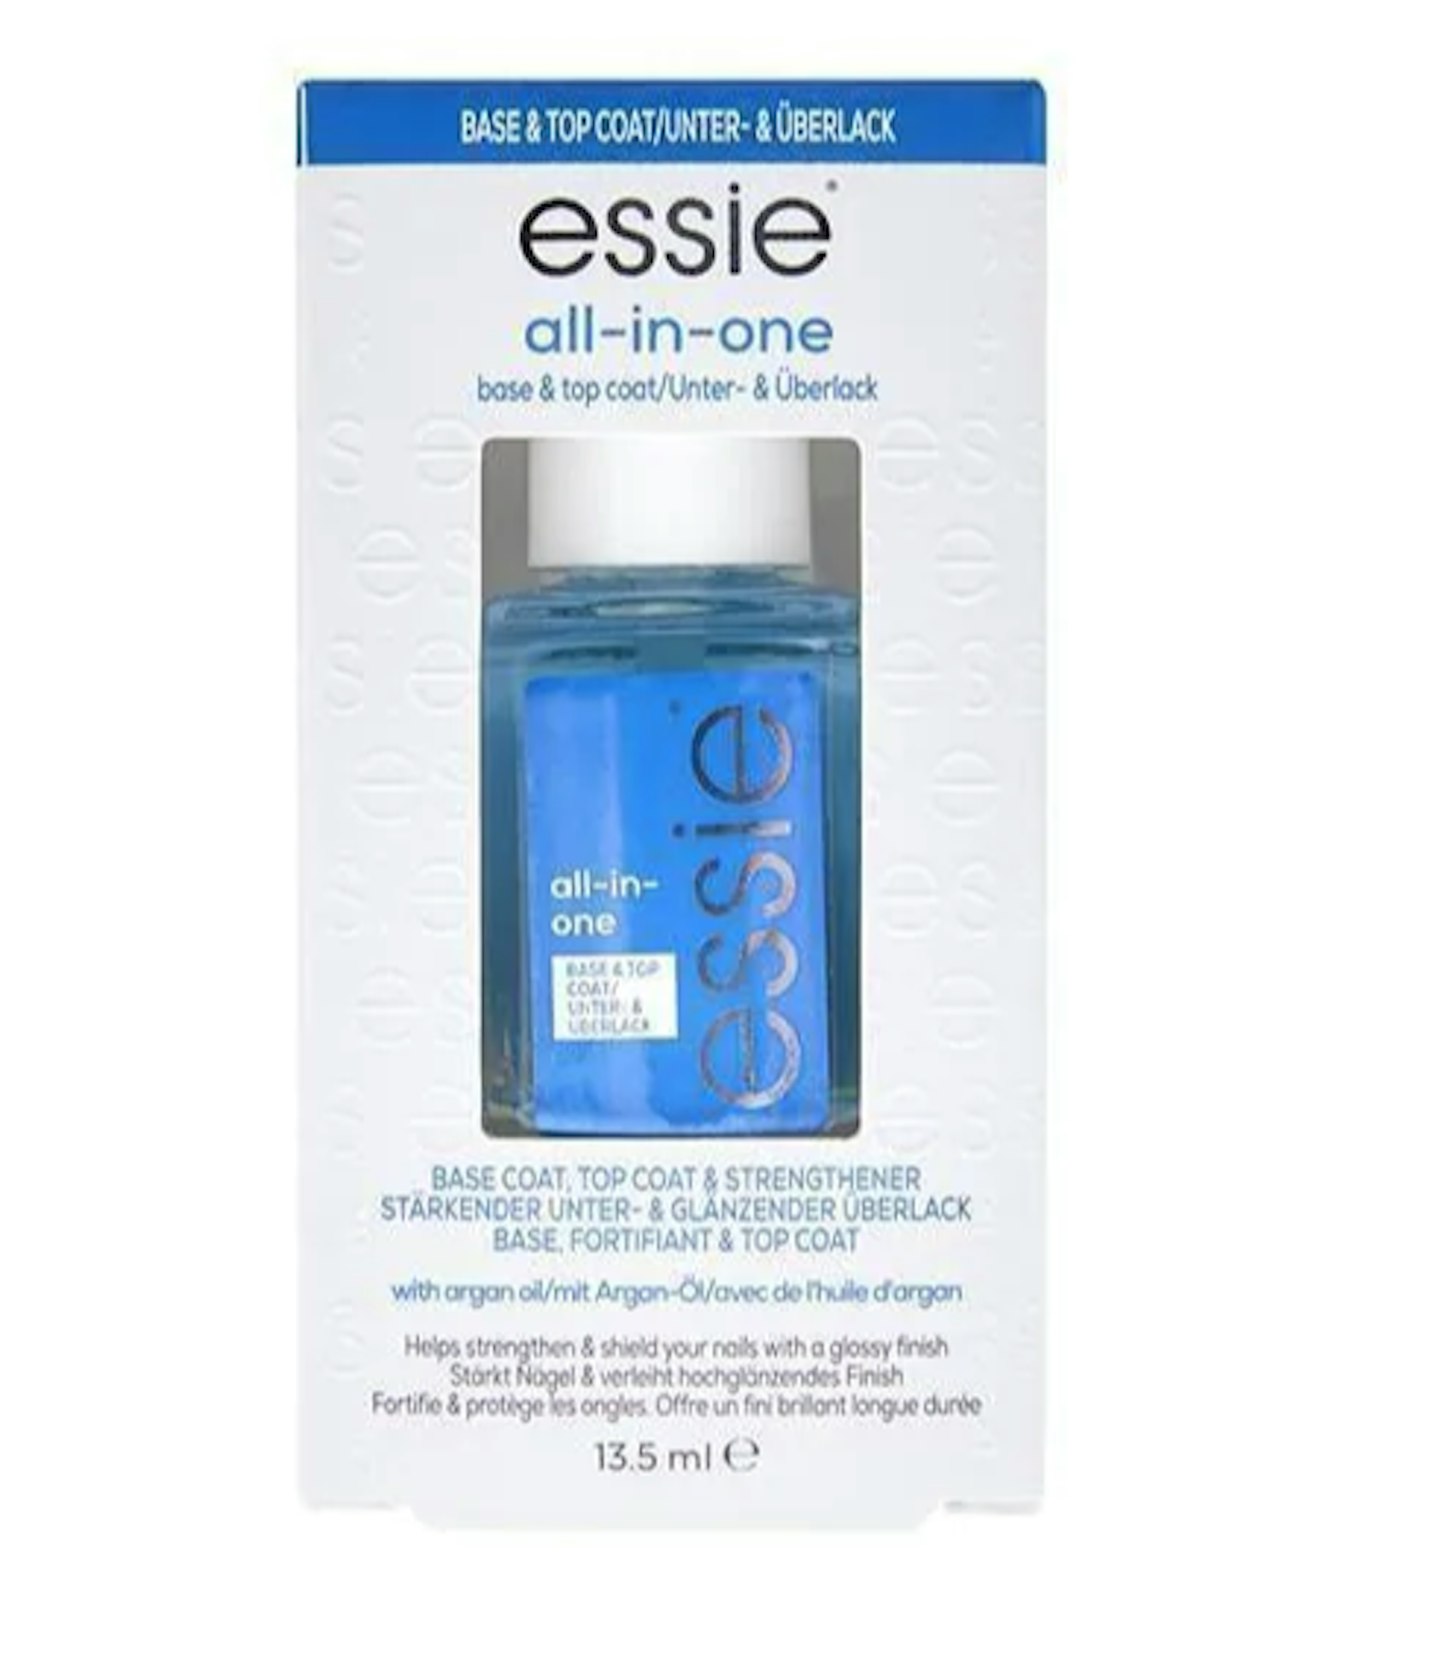 essie Nail Care All In One Nail Polish Base and Top Coat, £8.99